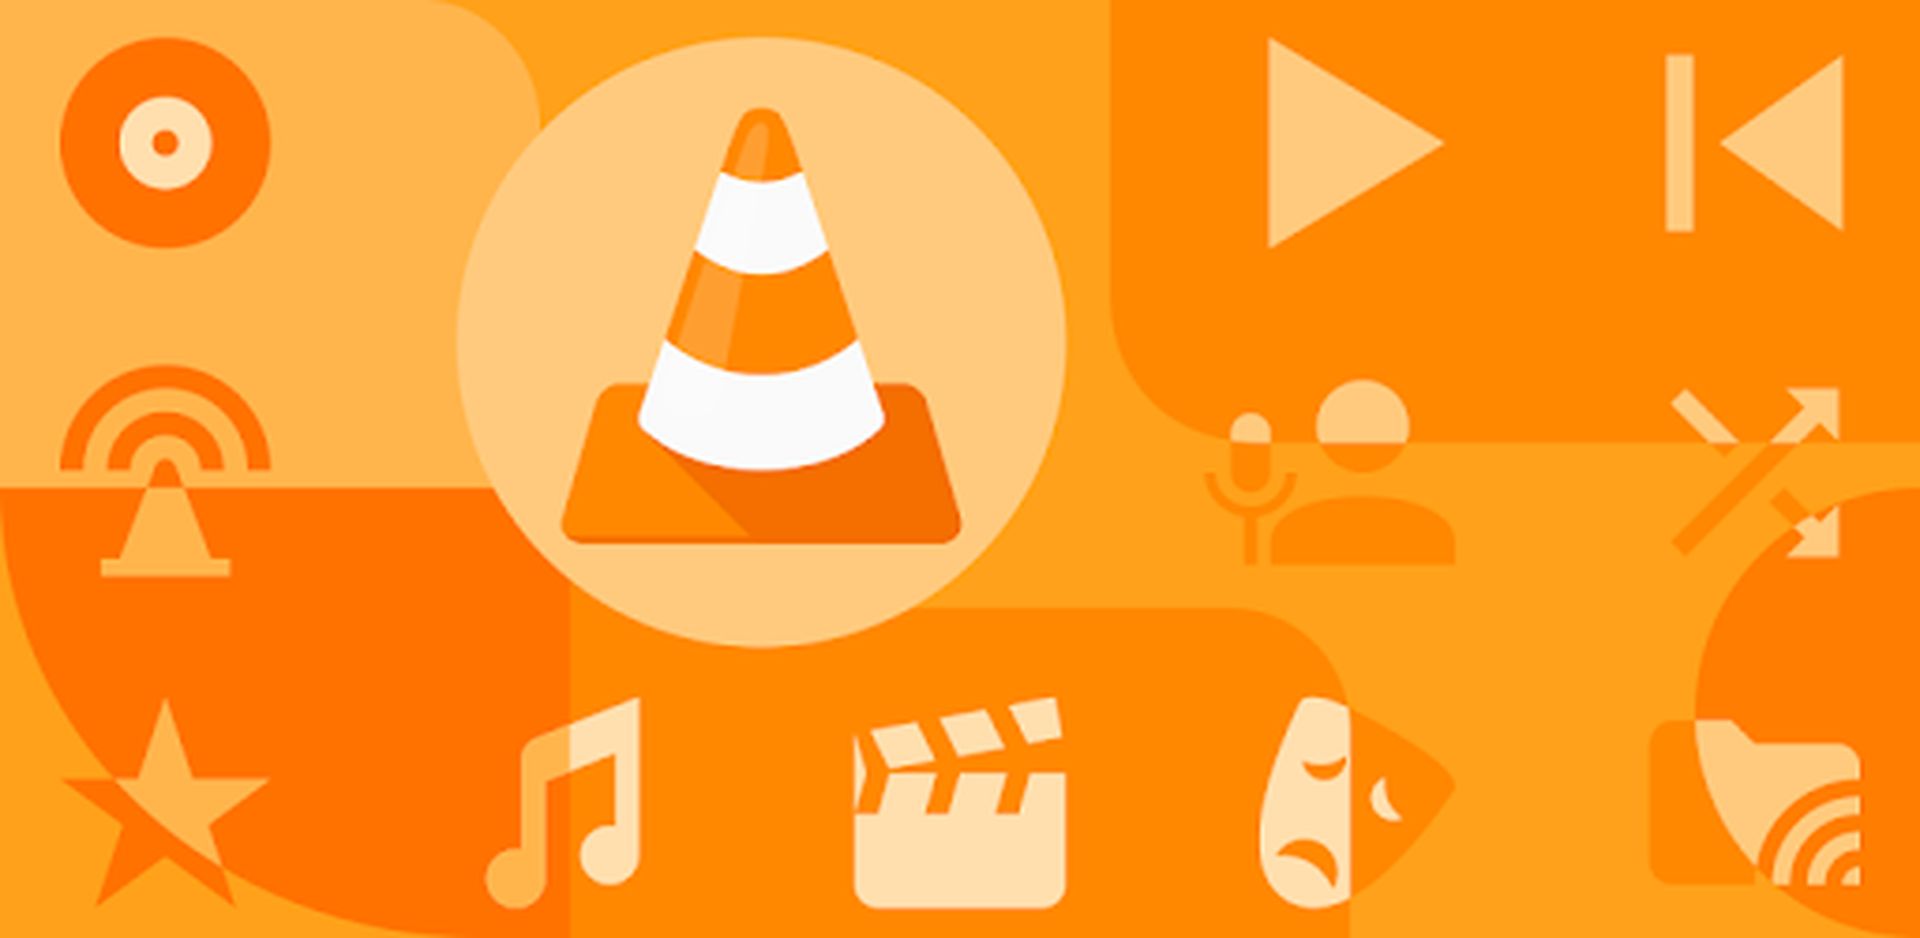 In this article, we are going to go over how to use VLC Chromecast, as well as give the answer to why does VLC not work with Chromecast.